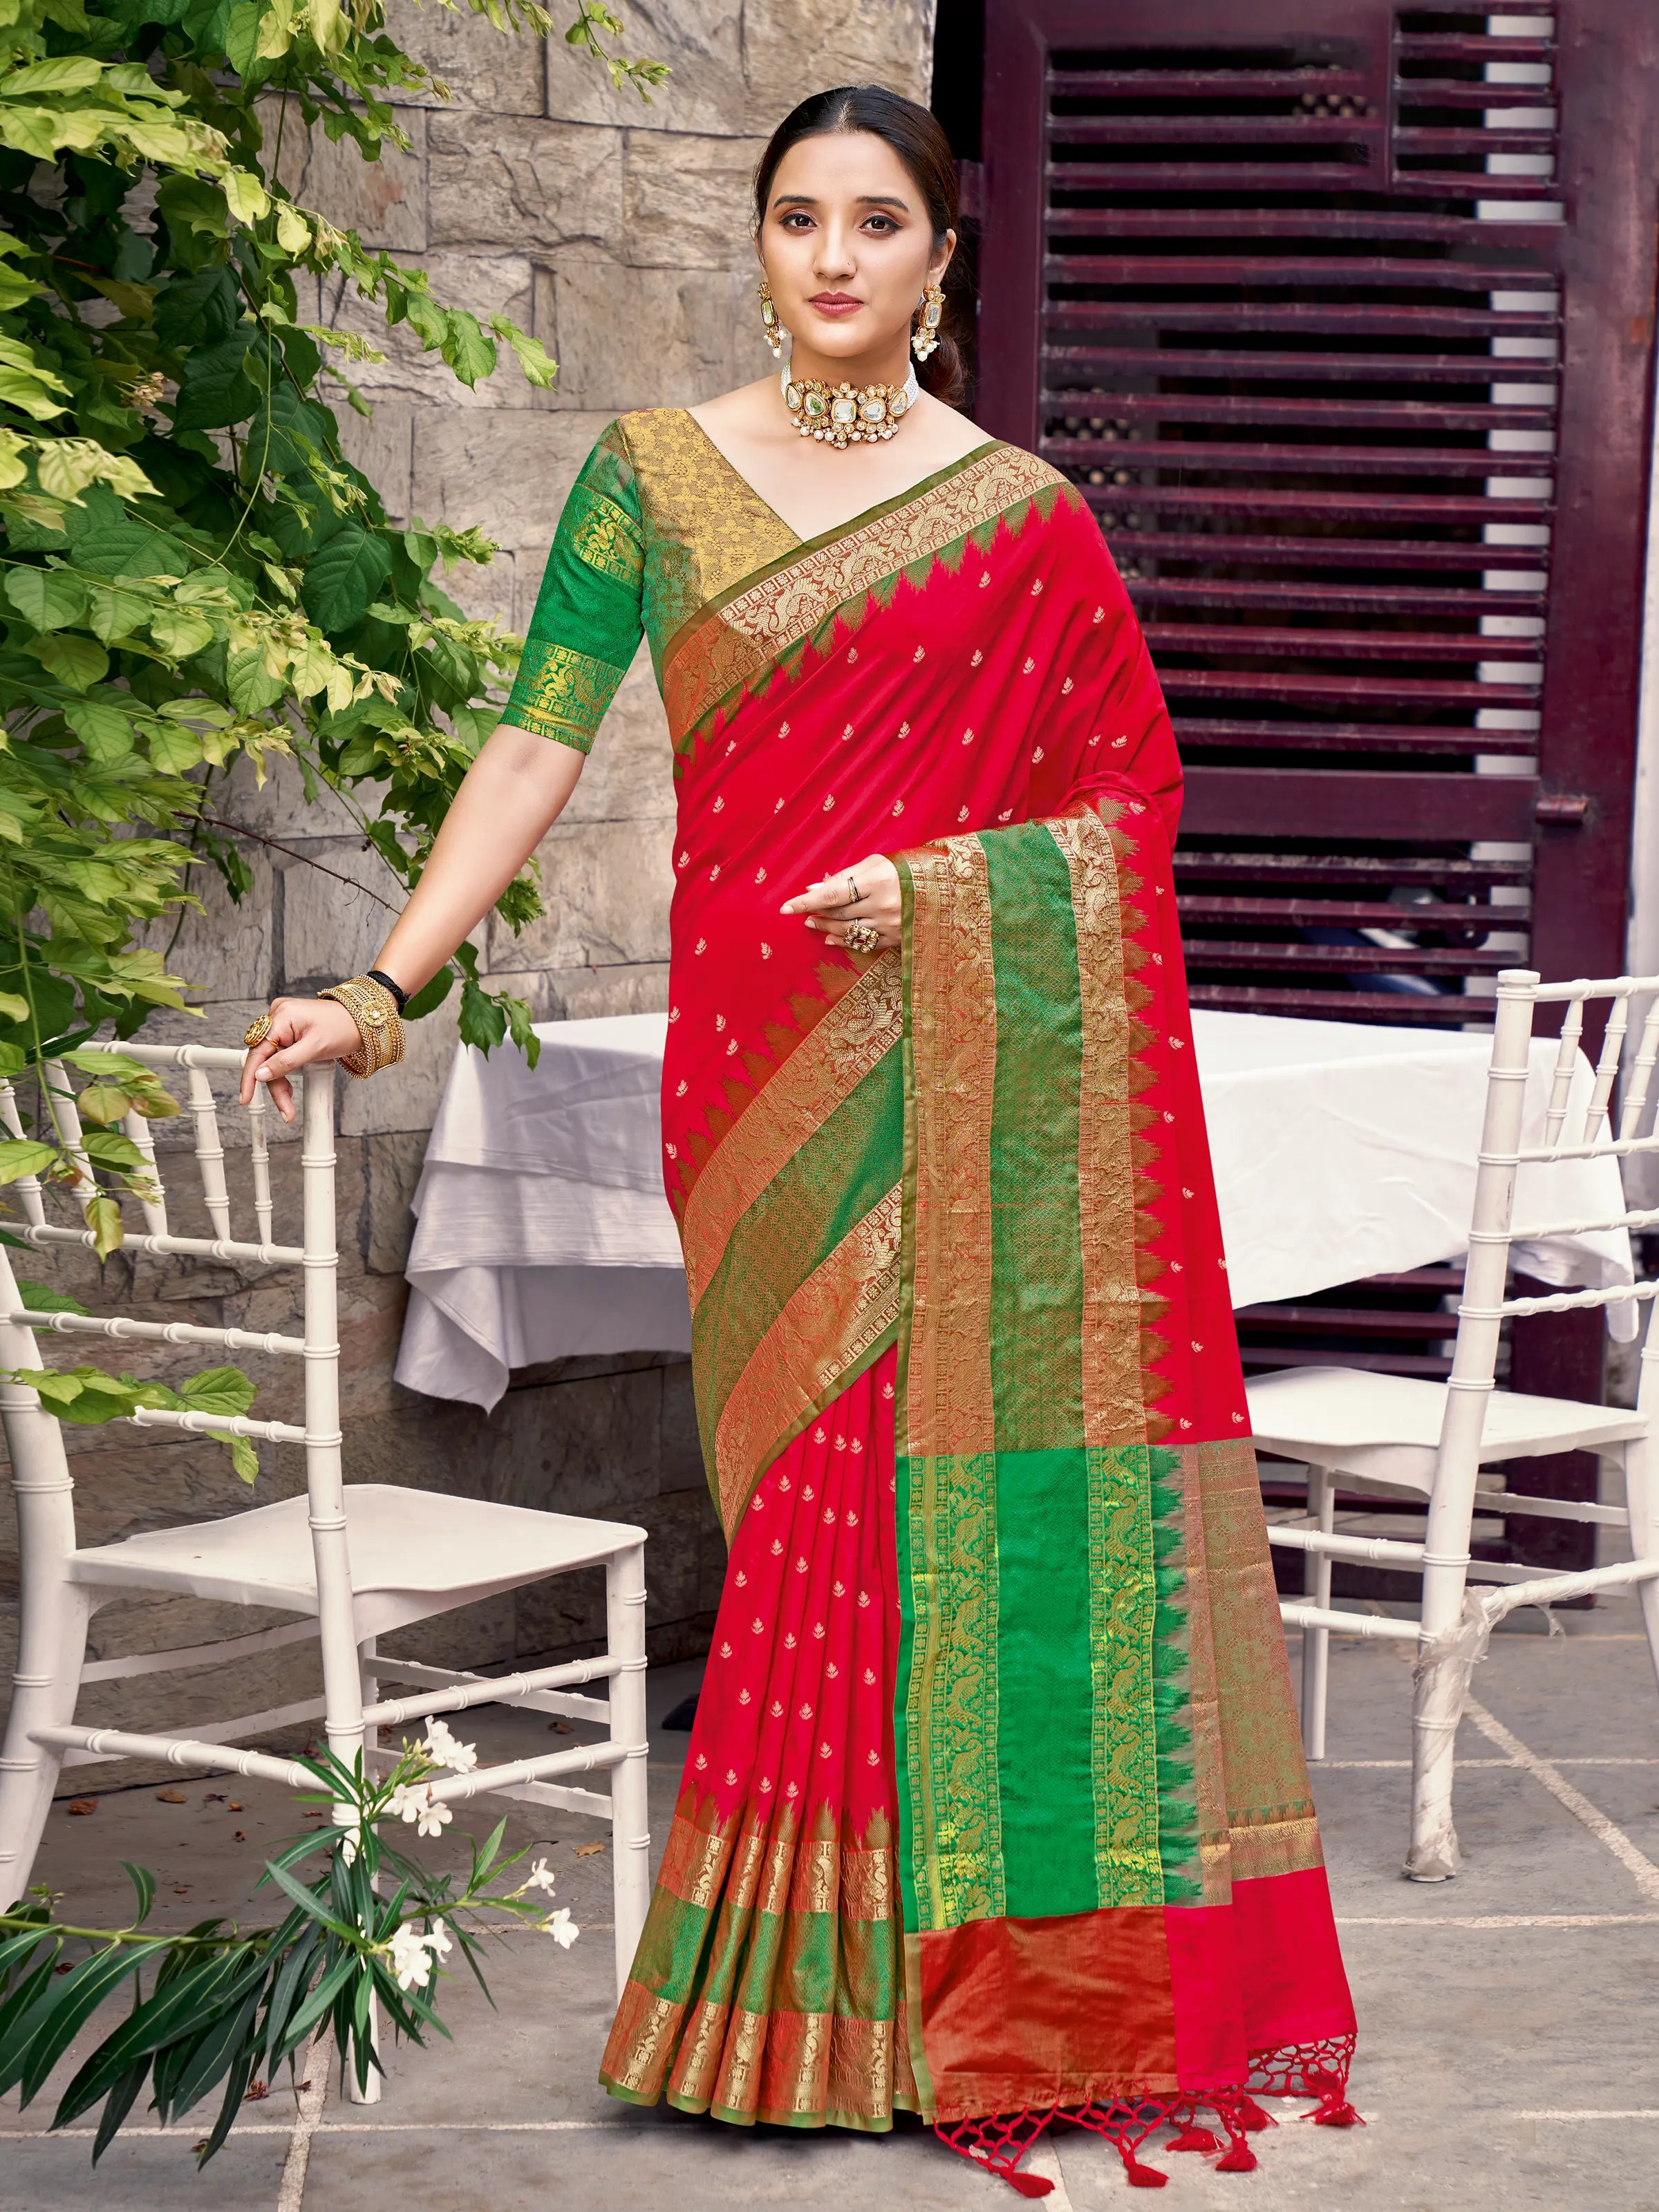 MugdhaArtStudio - Beautiful Kanjeevaram Saree from the house of Mugdha. The  combination of red and green is really amazing. The bridal collection from  kanchi pattu sarees is a very vibrant and elegant